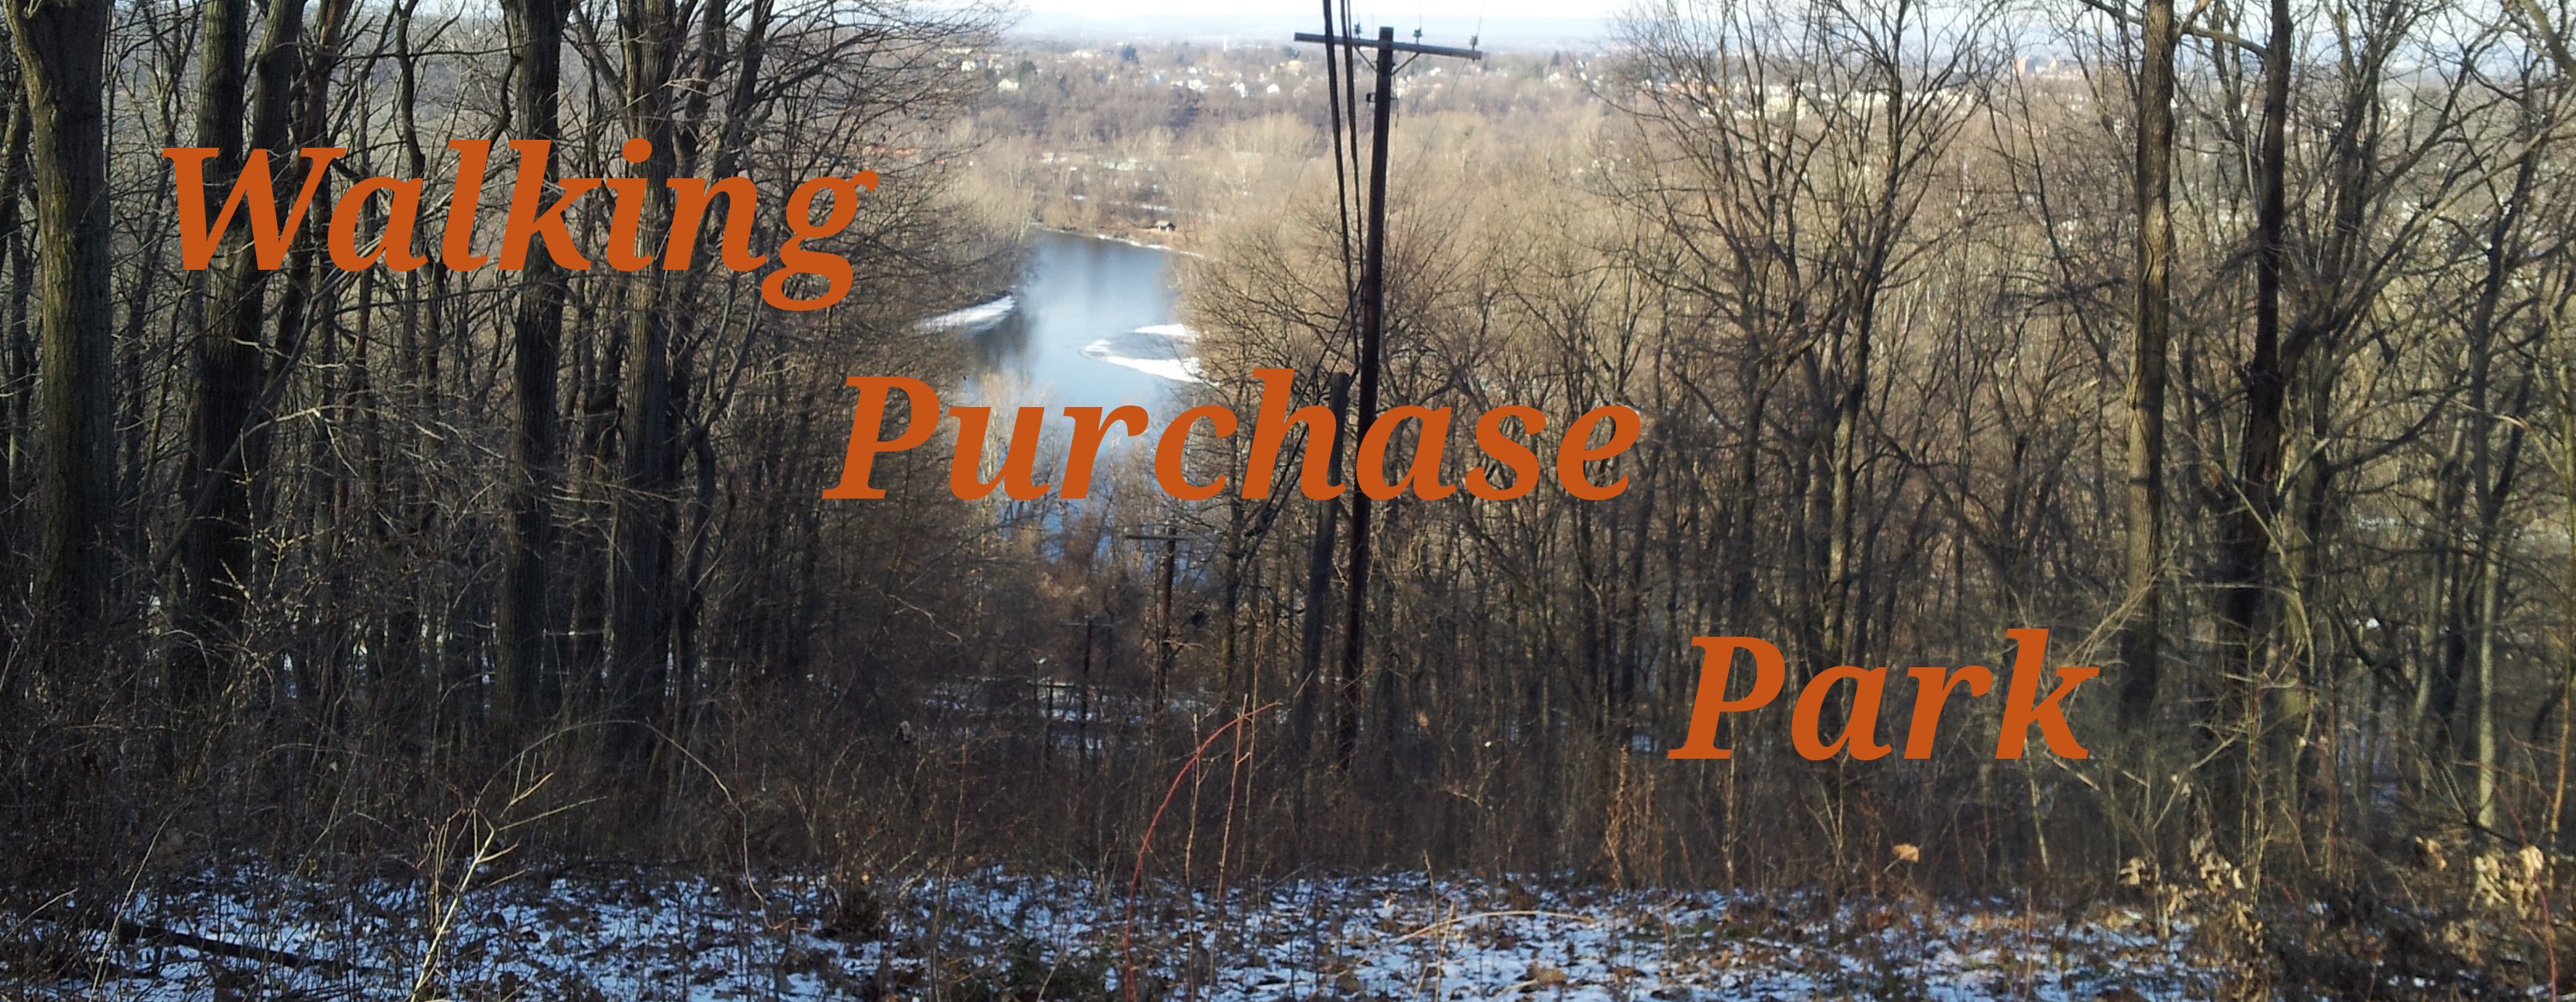 Walking Purchase Park Introductory Logo